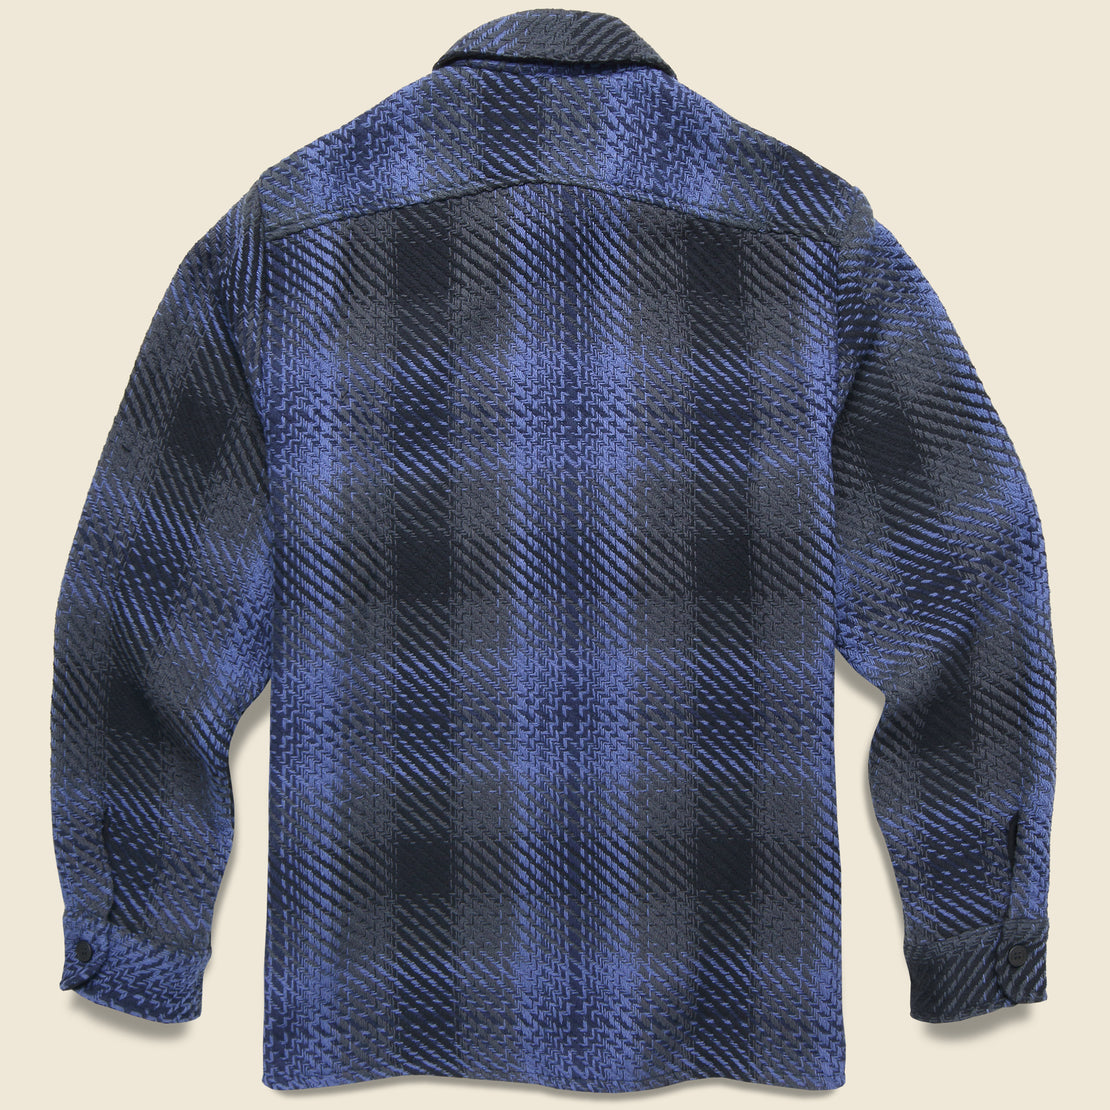 Whiting Overshirt - Navy Dusk Check - Wax London - STAG Provisions - Tops - L/S Woven - Plaid